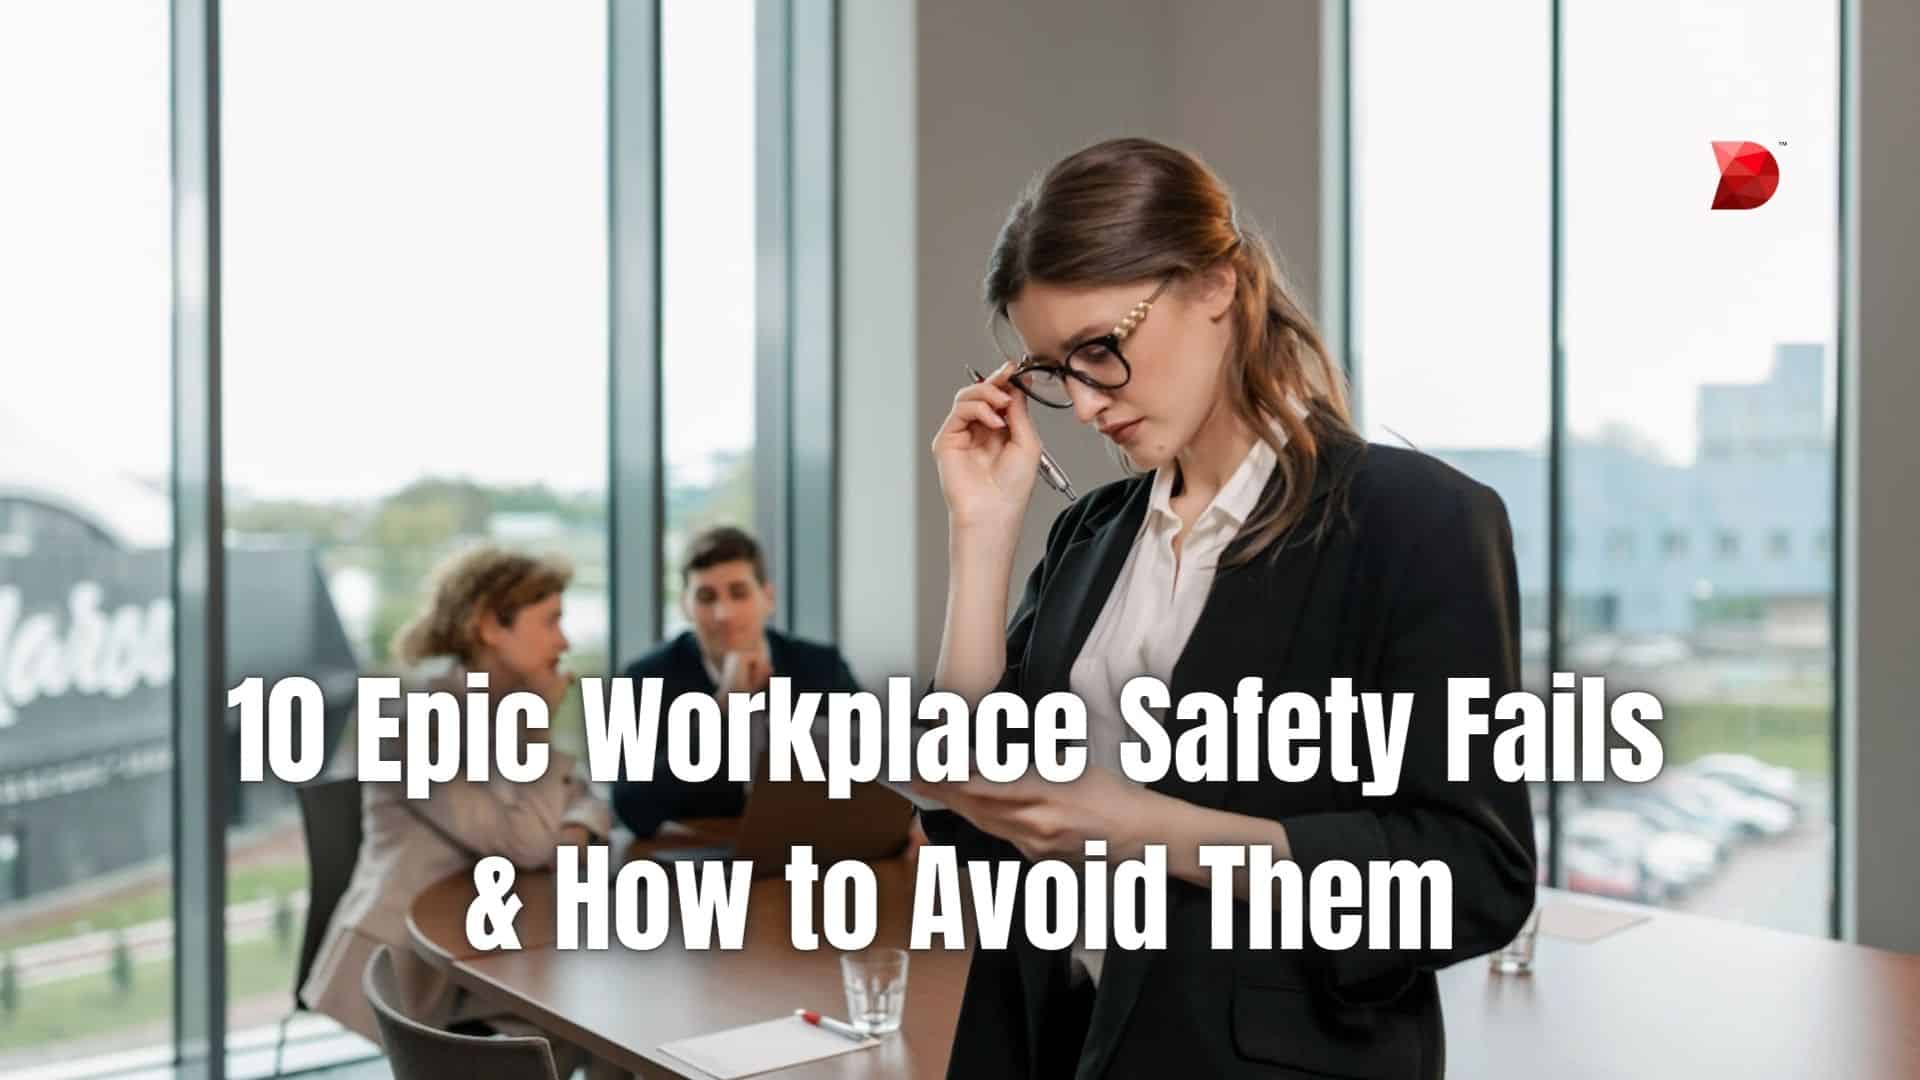 10 Epic Workplace Safety Fails & How to Avoid Them